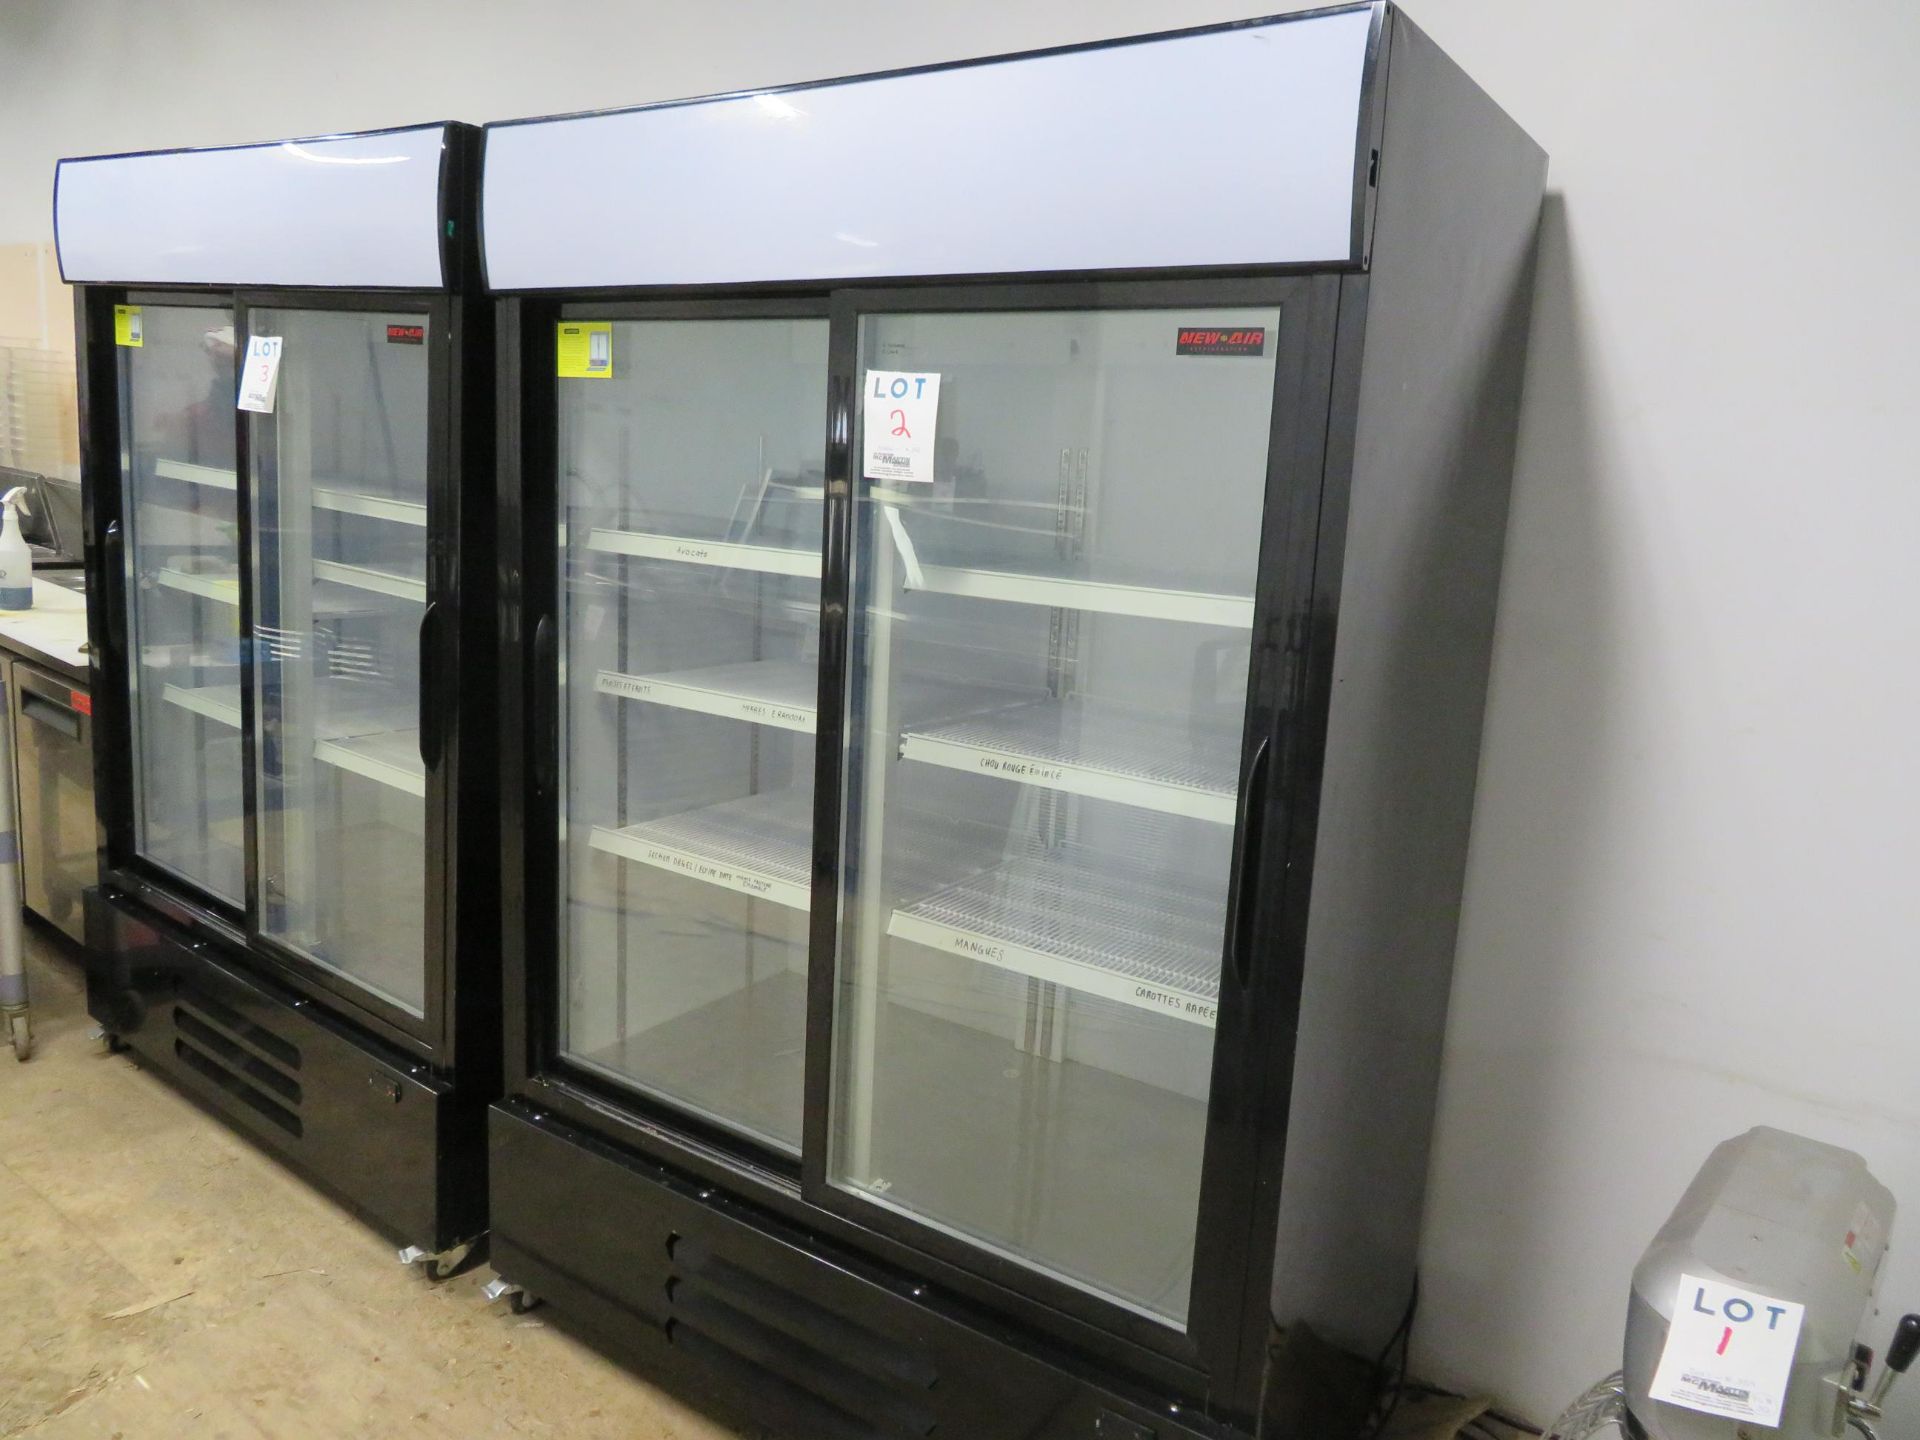 NEW AIR 2 door glass upright refrigerator on wheels, Mod # NGR-115S, approx. 54"w x 29"d x 78"h